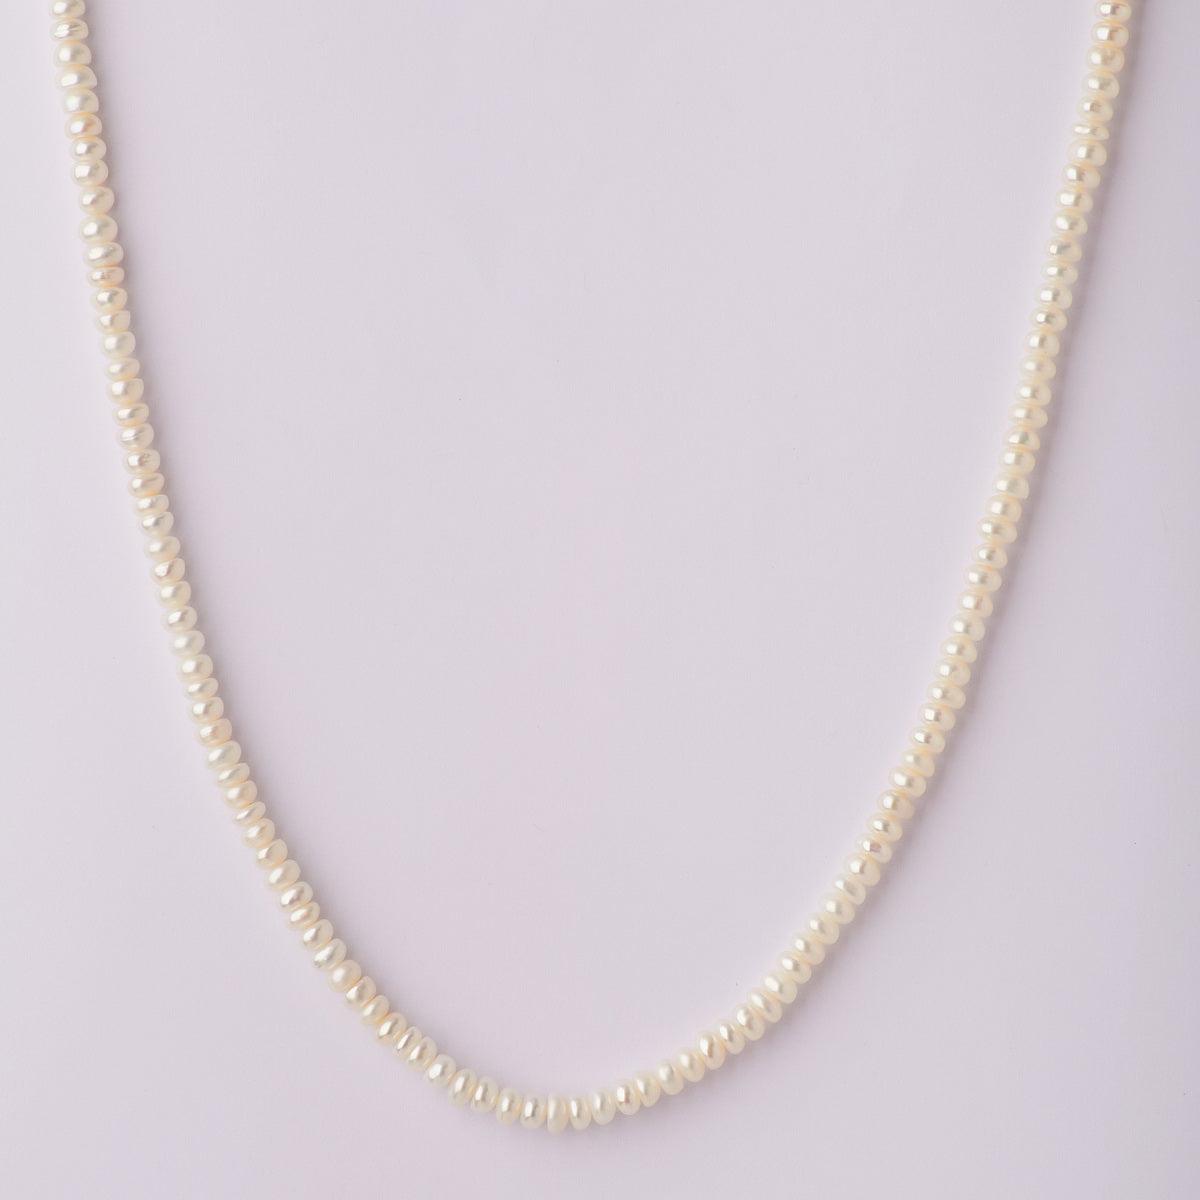 Elegant Real Pearl Necklace - Chandrani Pearls